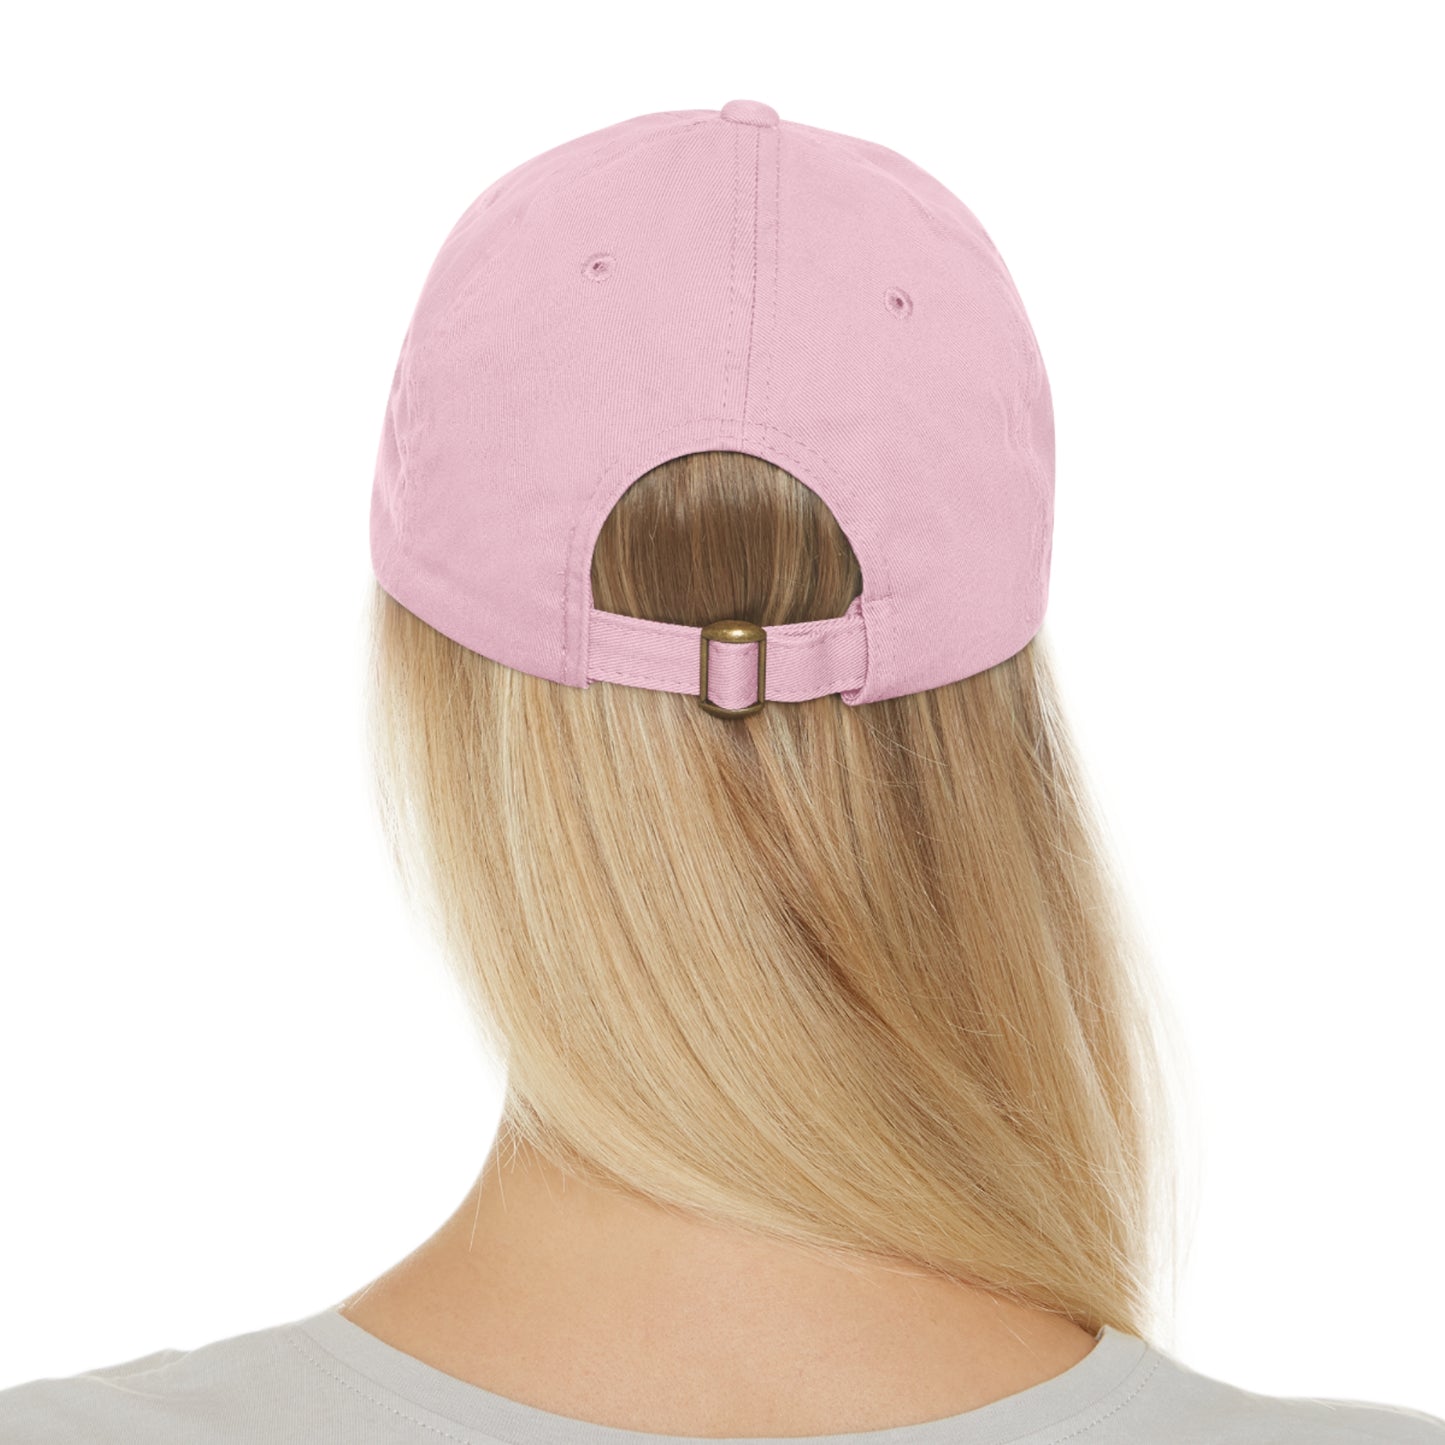 Queens for Love - Dad Hat with Leather Patch